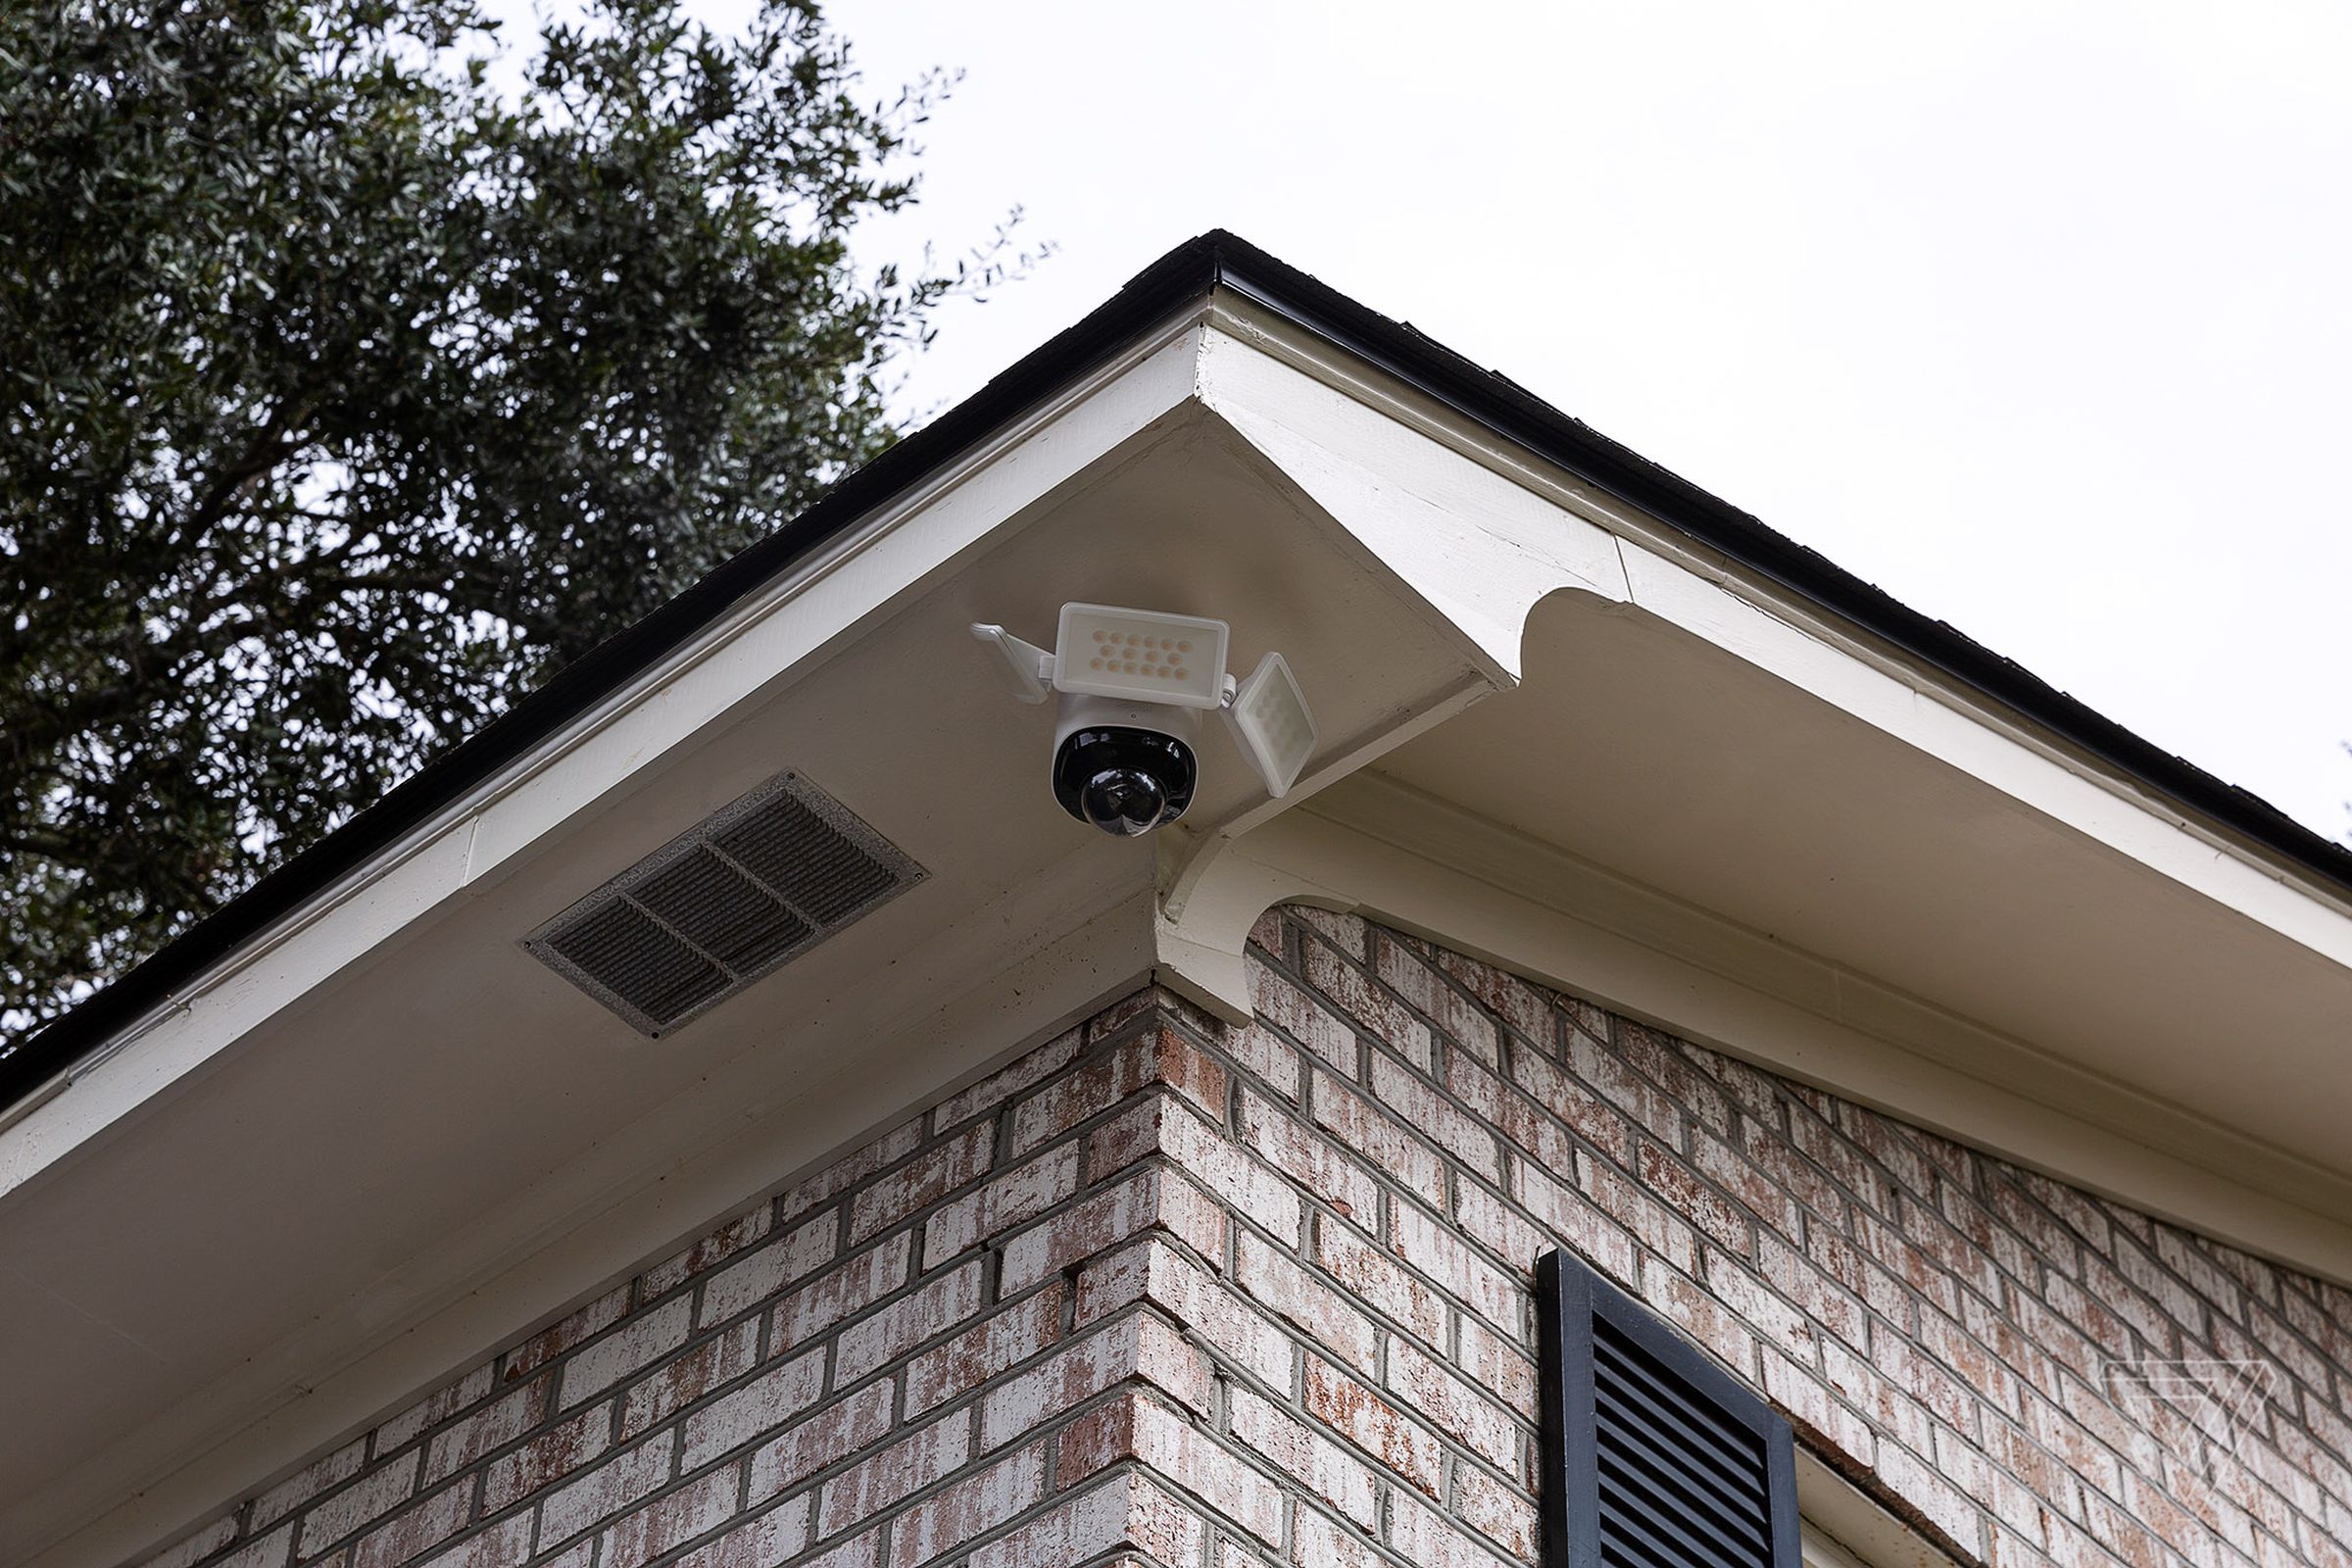 The Eufy Floodlight Cam 2 Pro looks like a mall security camera hanging off your house. It only works under eaves (as pictured) not mounted on a wall.